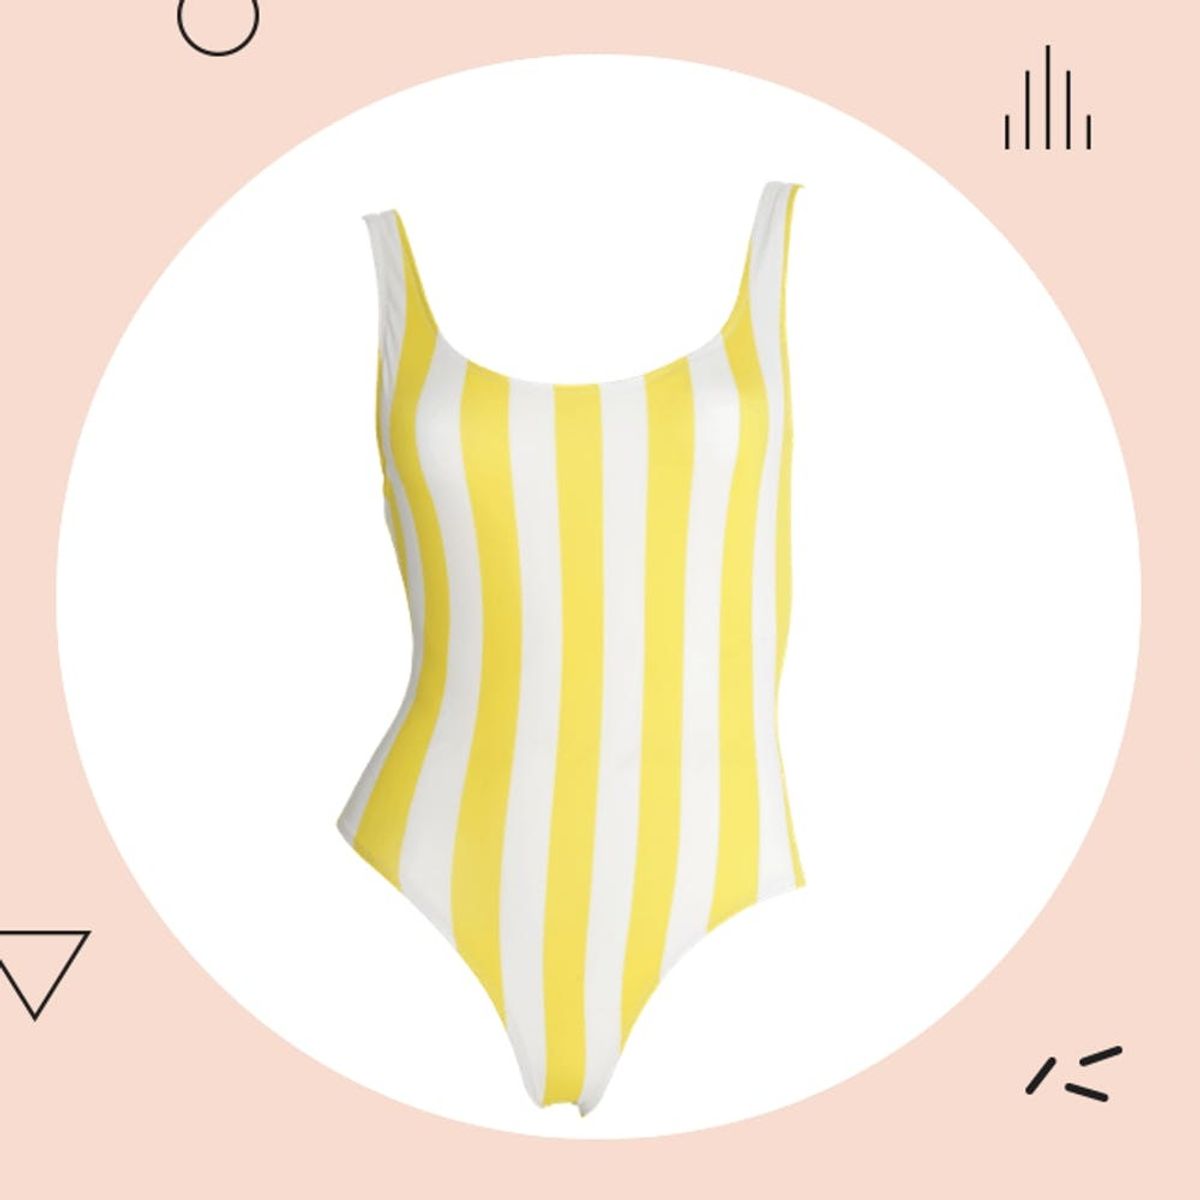 Instagram’s Top Swimwear Brand Just Collaborated With SoulCycle and the Results Are Perfection